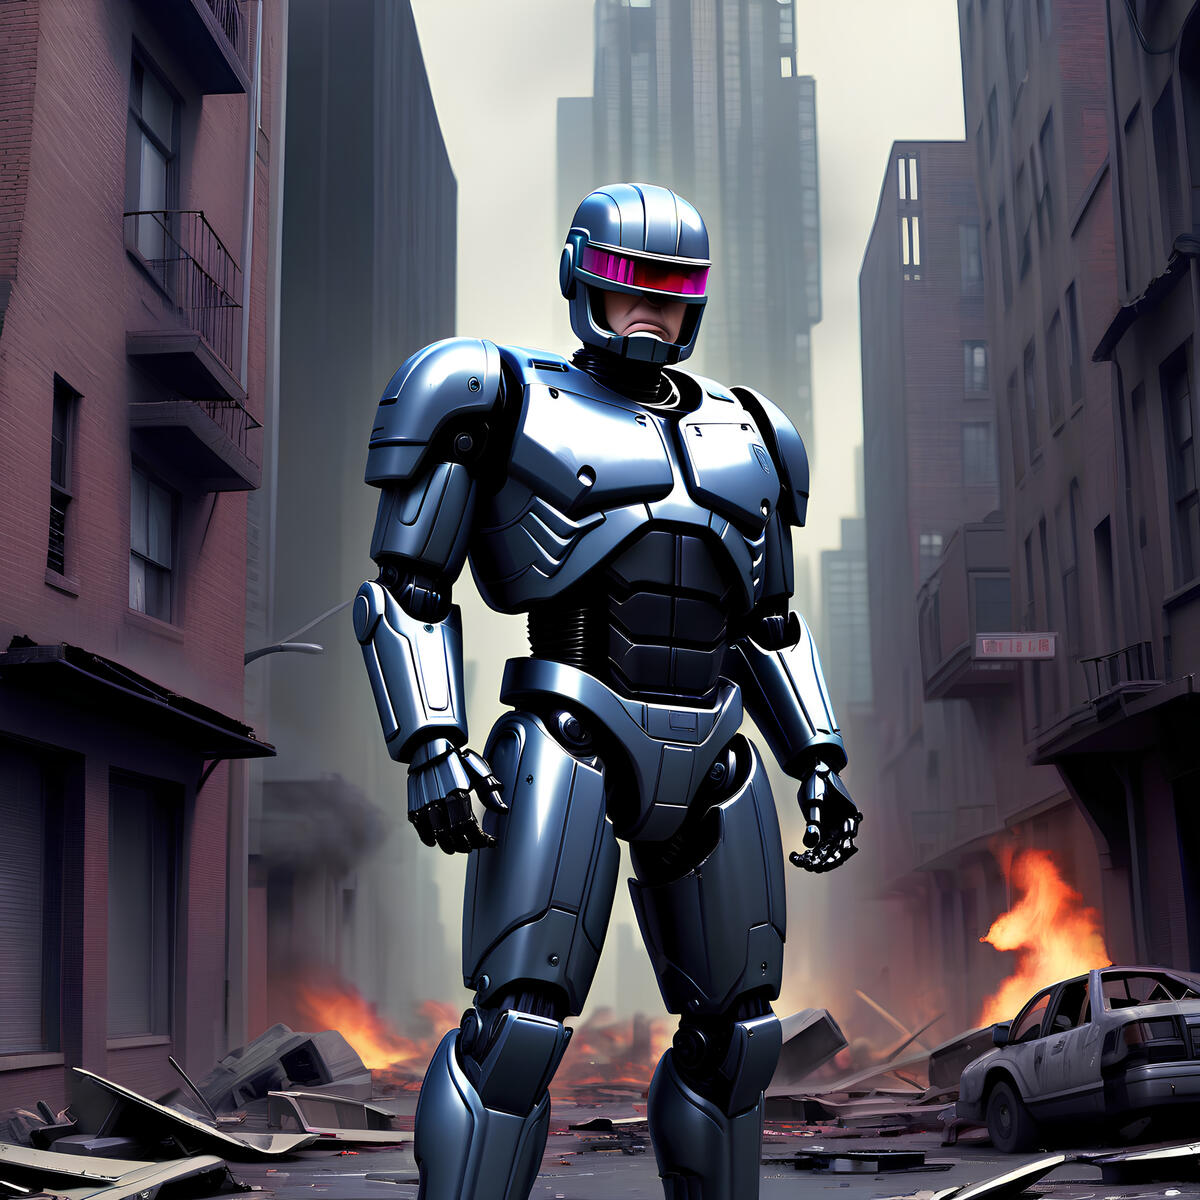 Robocop and the burning car